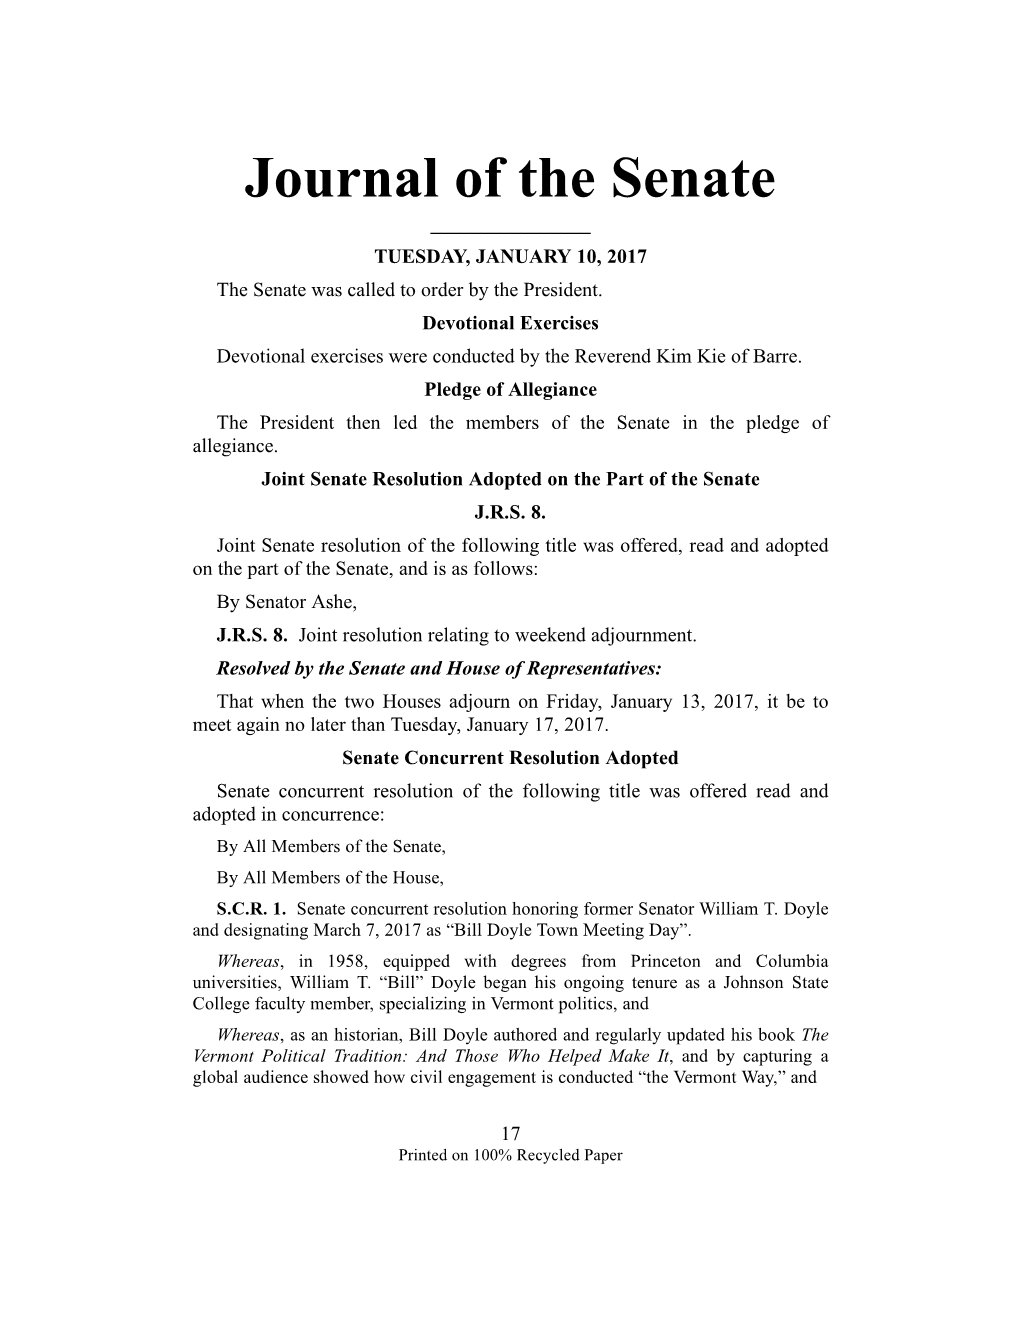 Journal of the Senate ______TUESDAY, JANUARY 10, 2017 the Senate Was Called to Order by the President